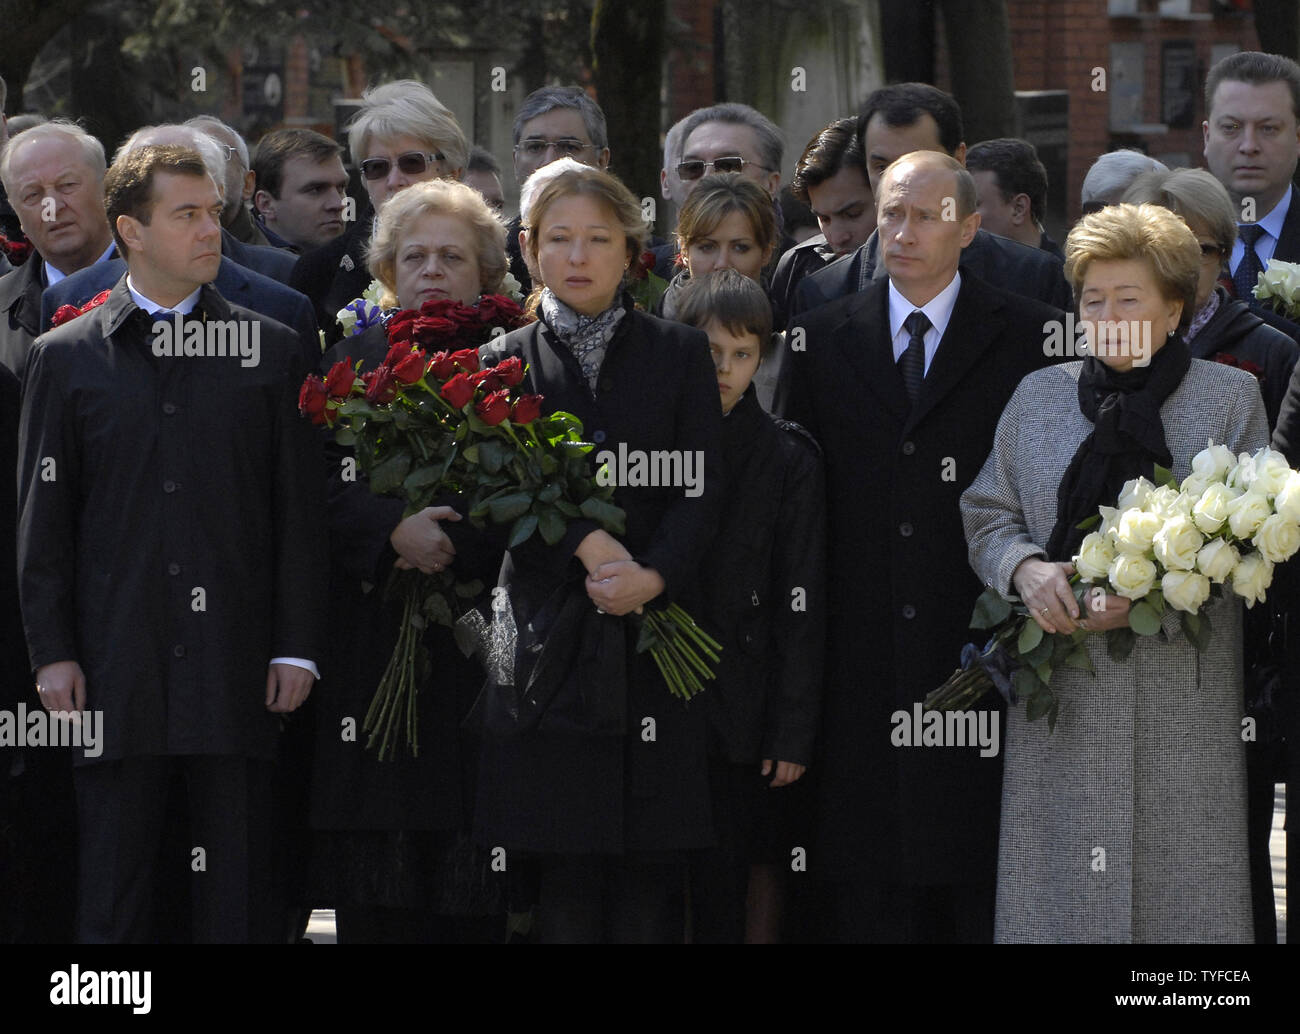 Russian President Vladimir Putin (2nd R) stands with the widow of Russia's first President Boris Yeltsin, Naina (R), as President-elect Dmitry Medvedev (L) looks on, during a ceremony for the unveiling of a monument to commemorating the first anniversary of the death of President Yeltsin at the Novodevichy cemetery in Moscow on April 23, 2008. Putin and hundreds of the country's political elite gathered to pay their respects to Boris Yeltsin on the first anniversary of his death. (UPI Photo/Alexander Astafiev) Stock Photo